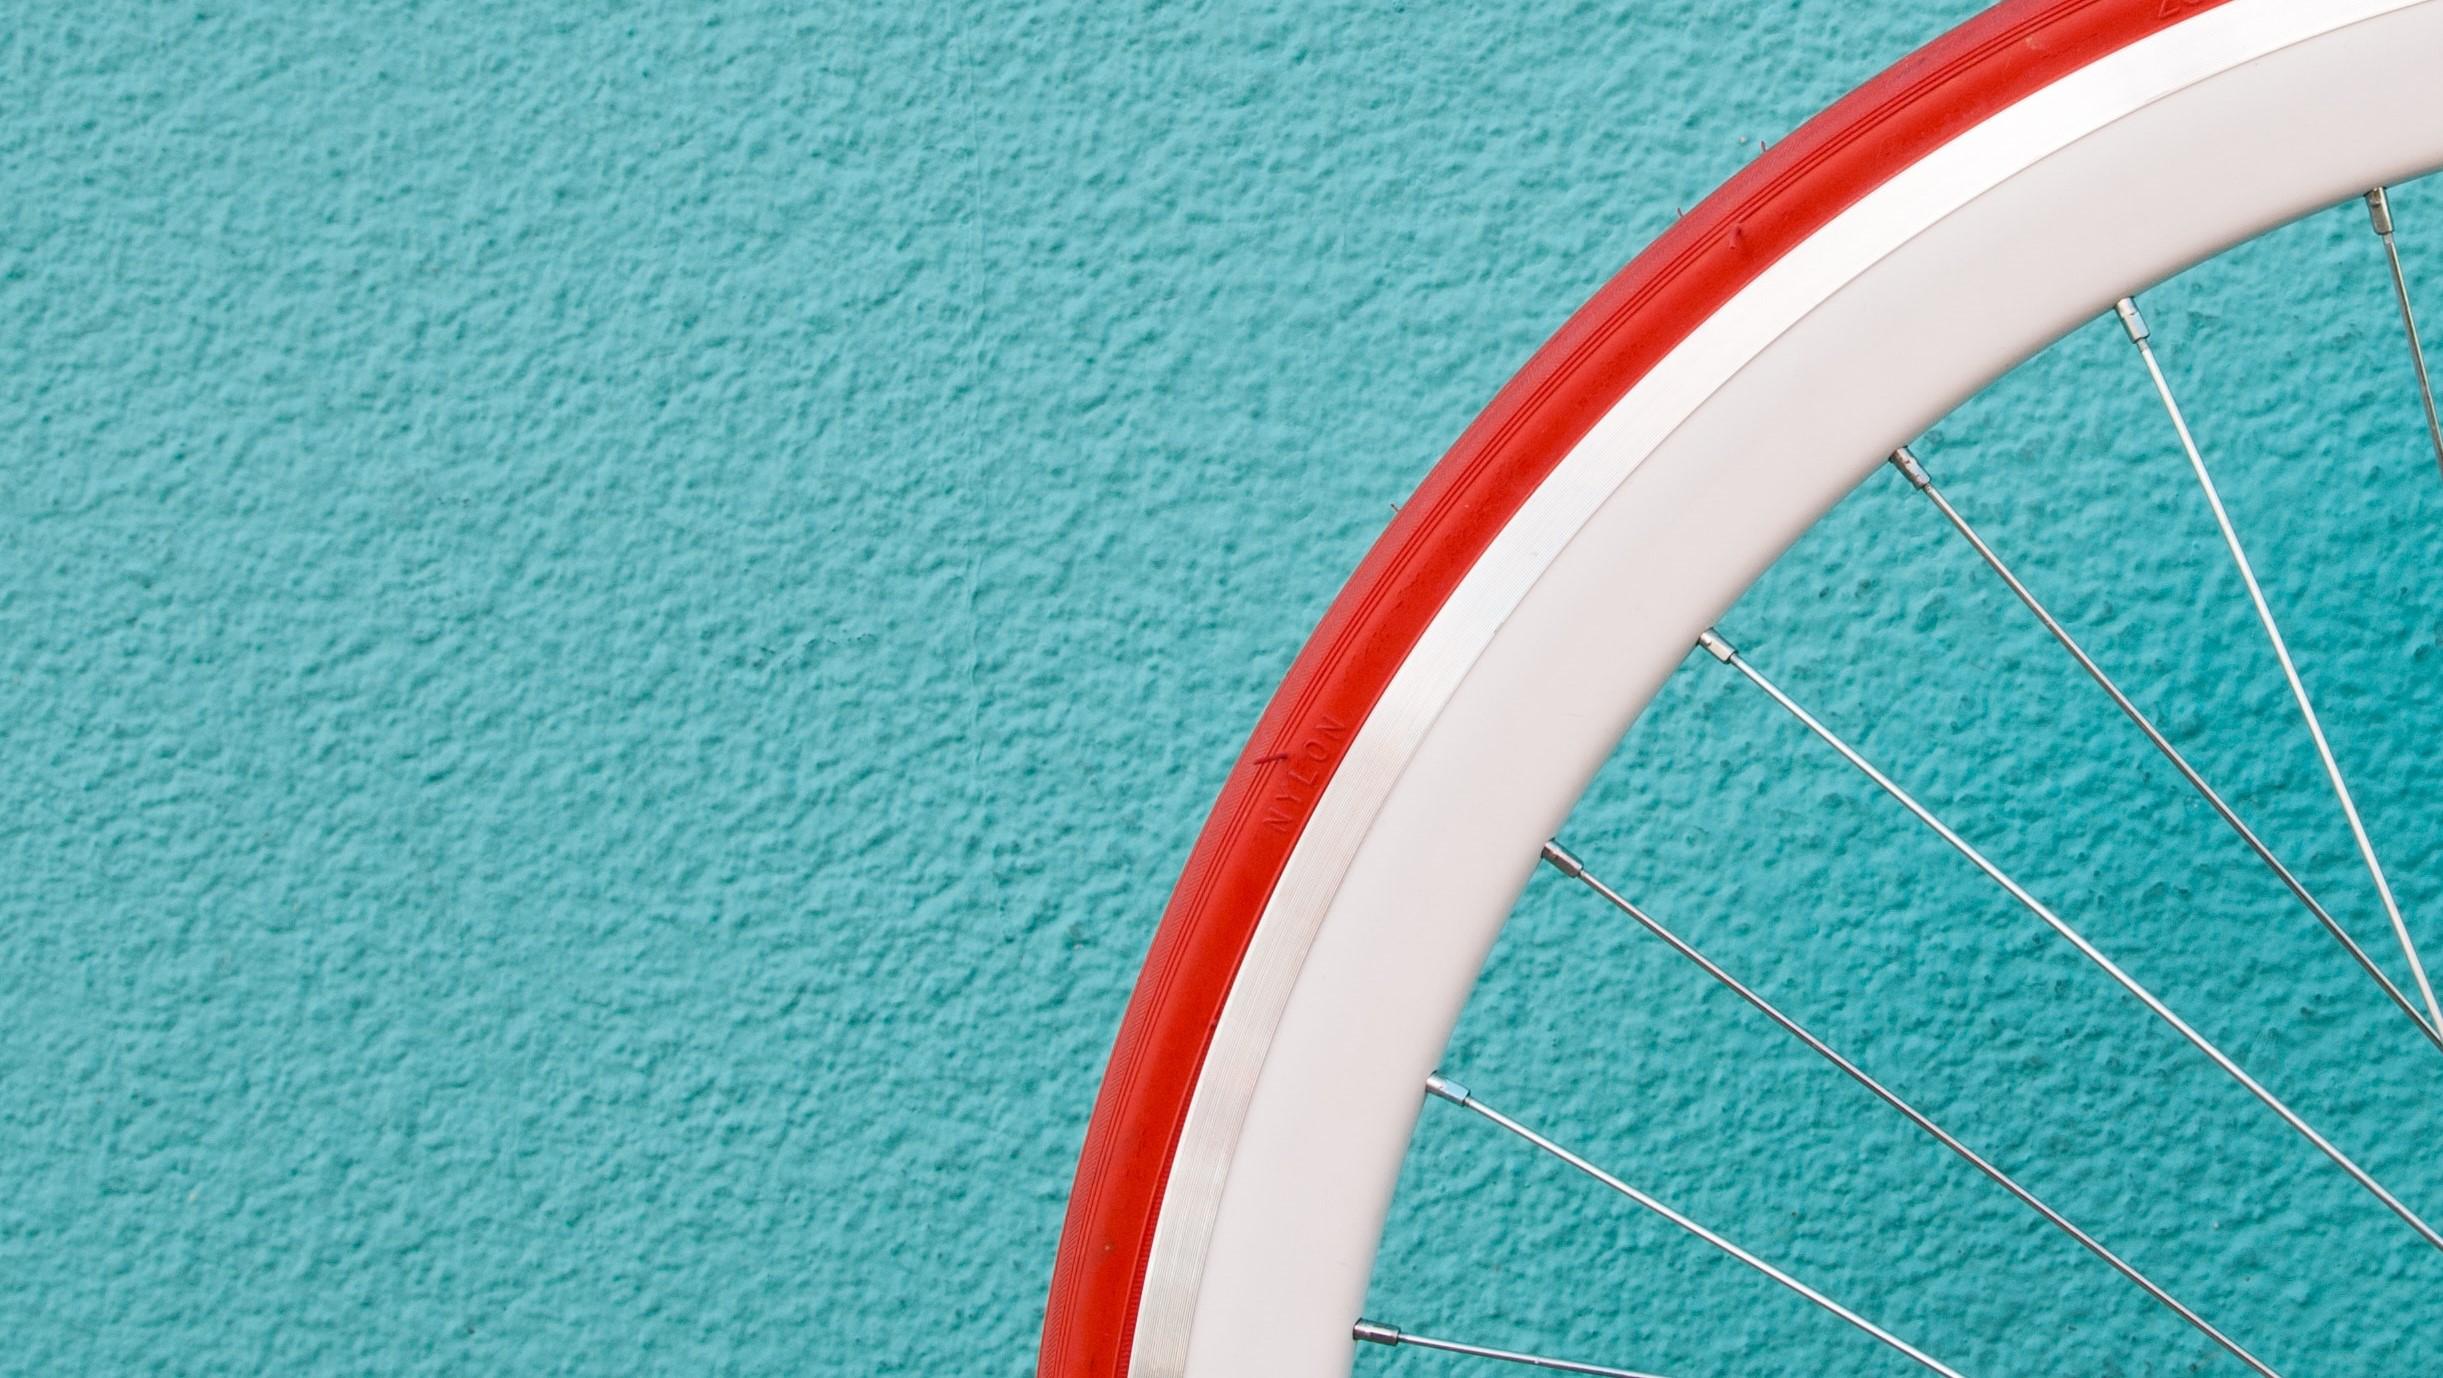 Part of a wheel of a bicycle against an aqua-coloured wall.